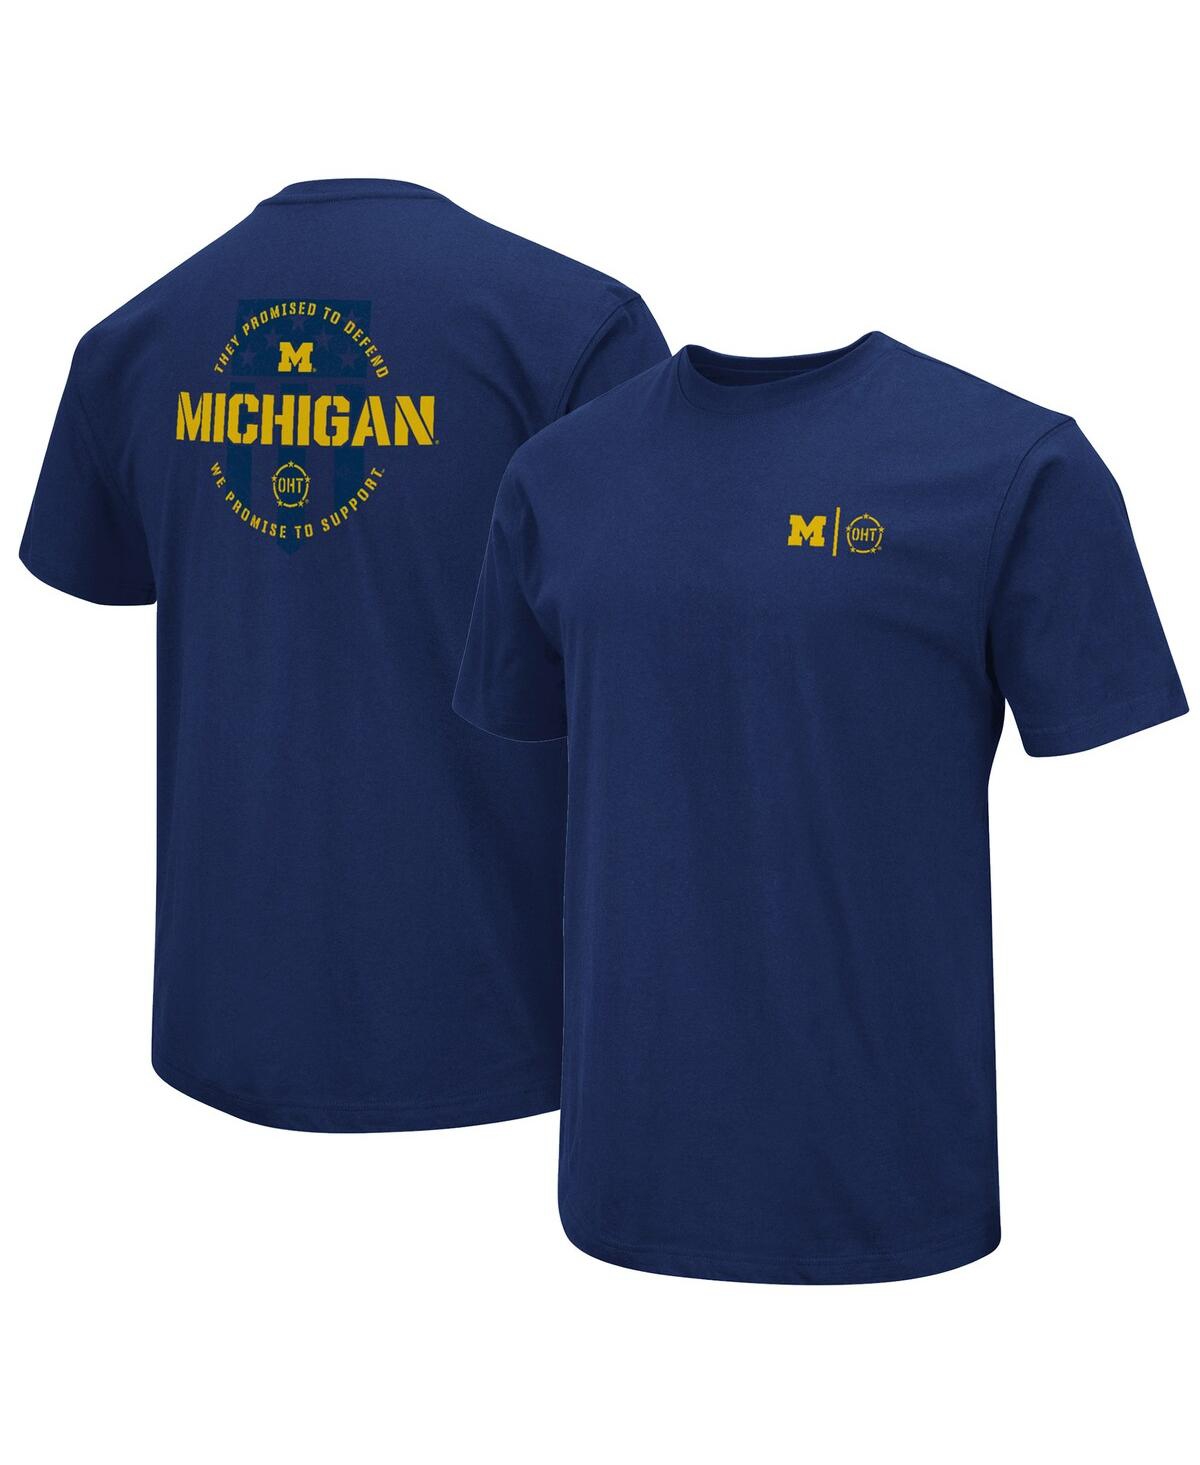 Shop Colosseum Men's  Navy Michigan Wolverines Oht Military-inspired Appreciation T-shirt